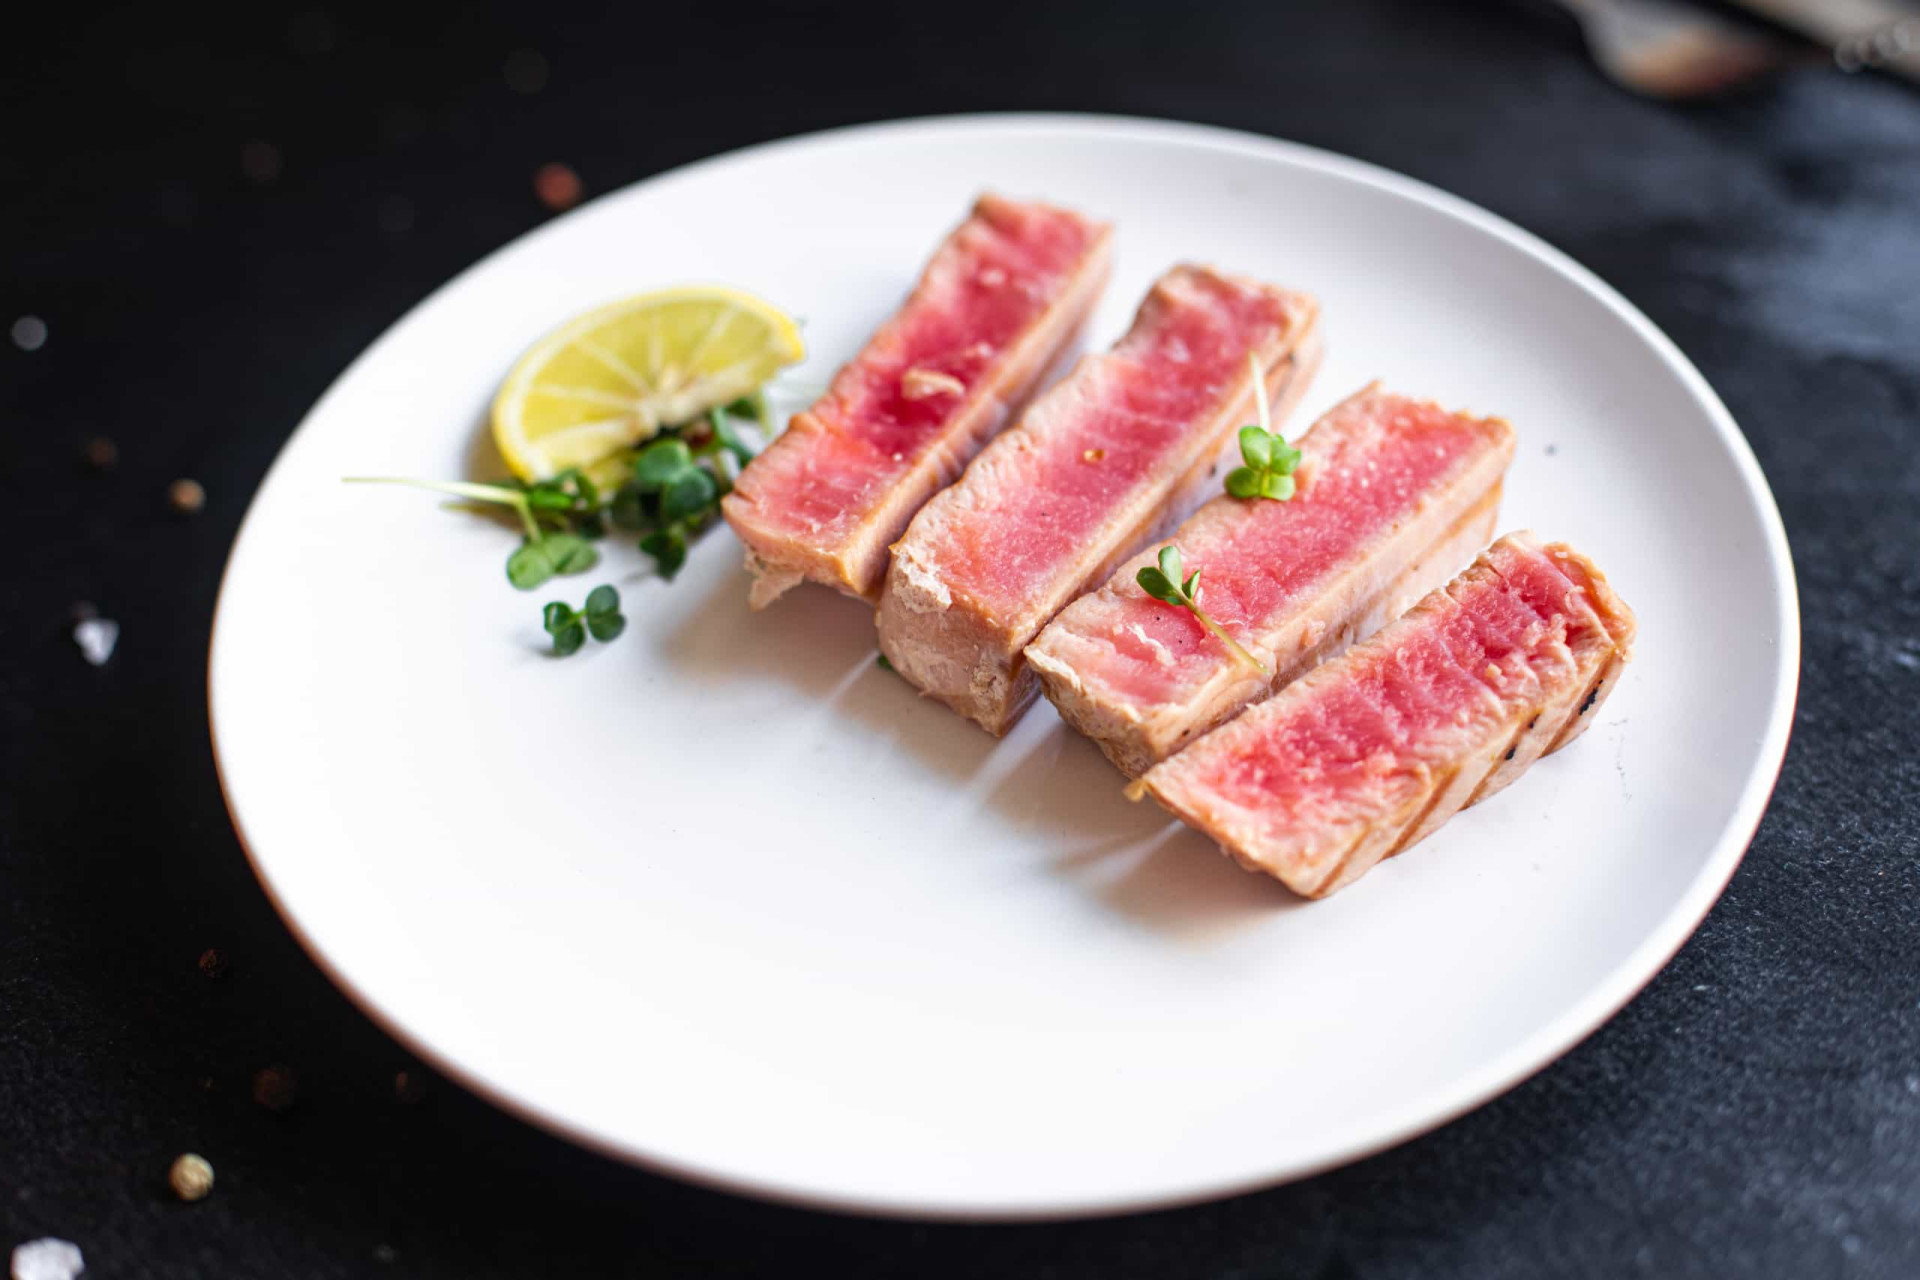 <p>Tuna is known for being a great source of vitamin D in our diet. Additionally, it is packed with omega-3 fatty acids that can lower cholesterol and enhance cardiovascular well-being. Moreover, tuna boasts an abundant amount of potassium, which aids in the reduction of blood pressure.</p><p><a href="https://www.msn.com/en-us/community/channel/vid-7xx8mnucu55yw63we9va2gwr7uihbxwc68fxqp25x6tg4ftibpra?cvid=94631541bc0f4f89bfd59158d696ad7e">Follow us and access great exclusive content every day</a></p>